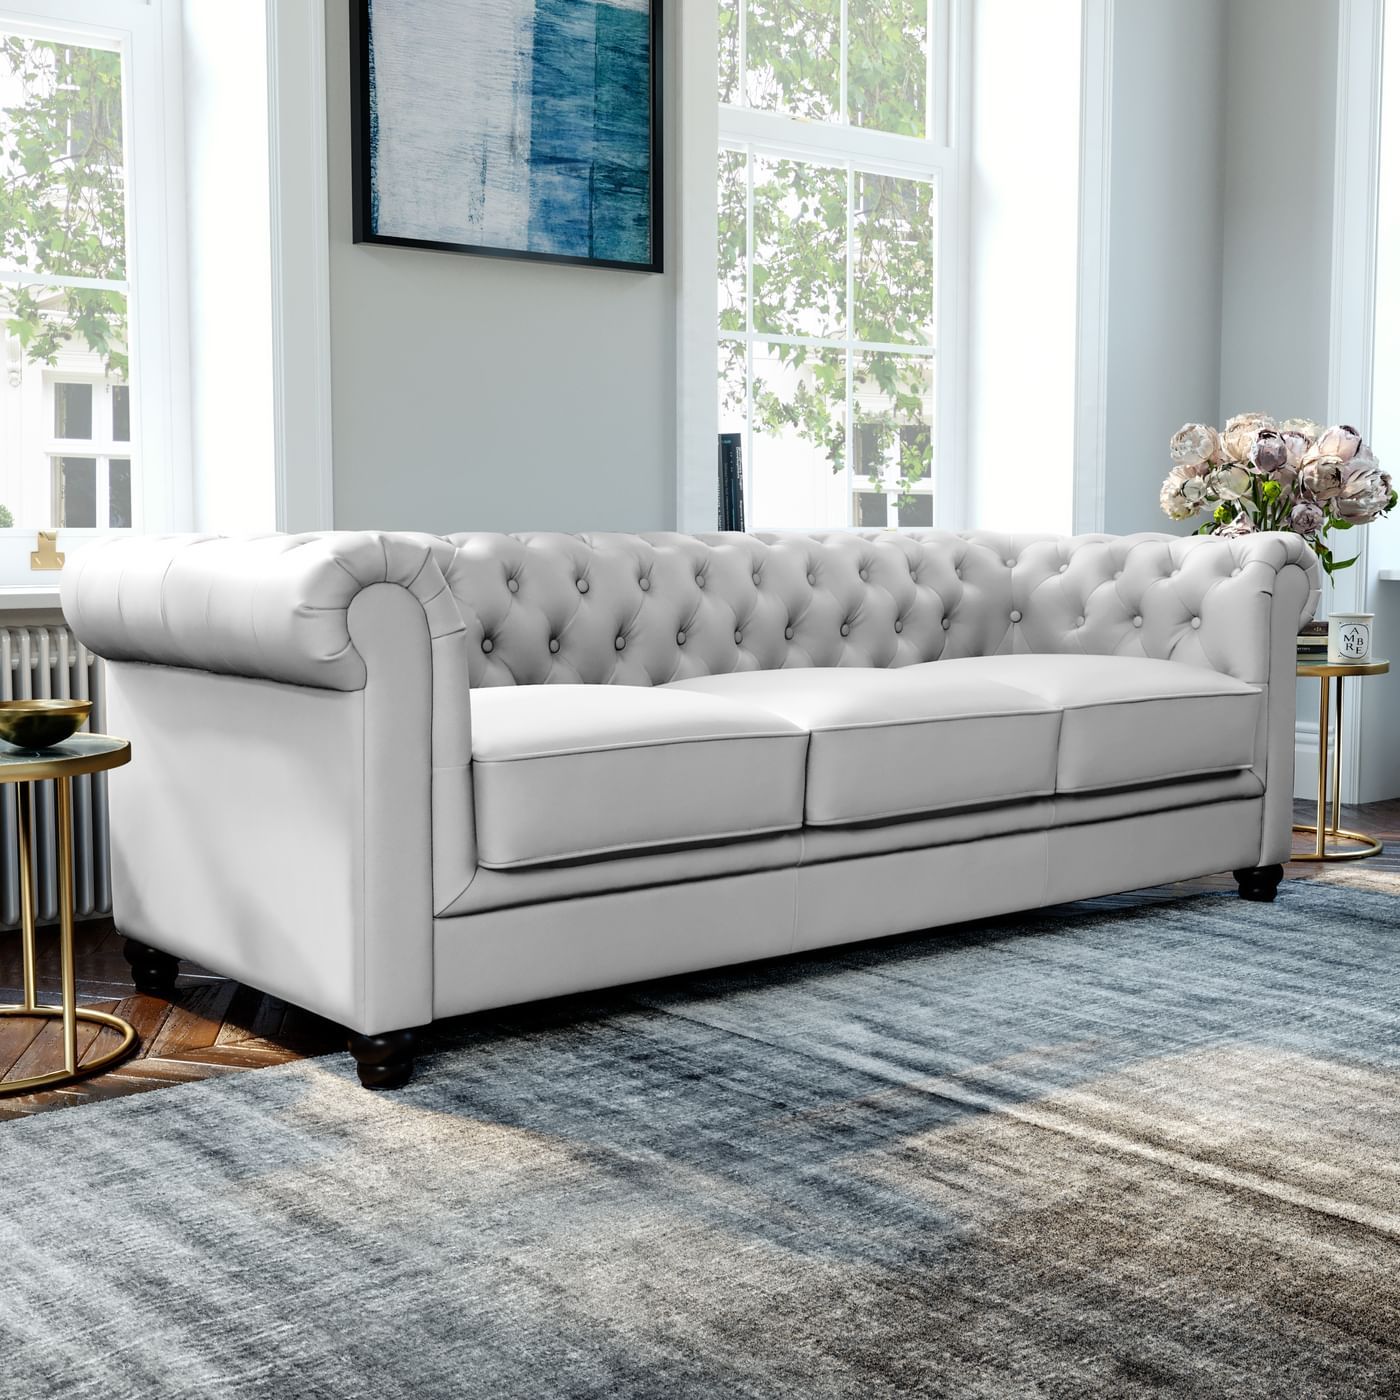 Hampton Light Grey Leather 3 Seater Chesterfield Sofa | Furniture Choice With Regard To Sofas In Light Gray (Gallery 2 of 22)